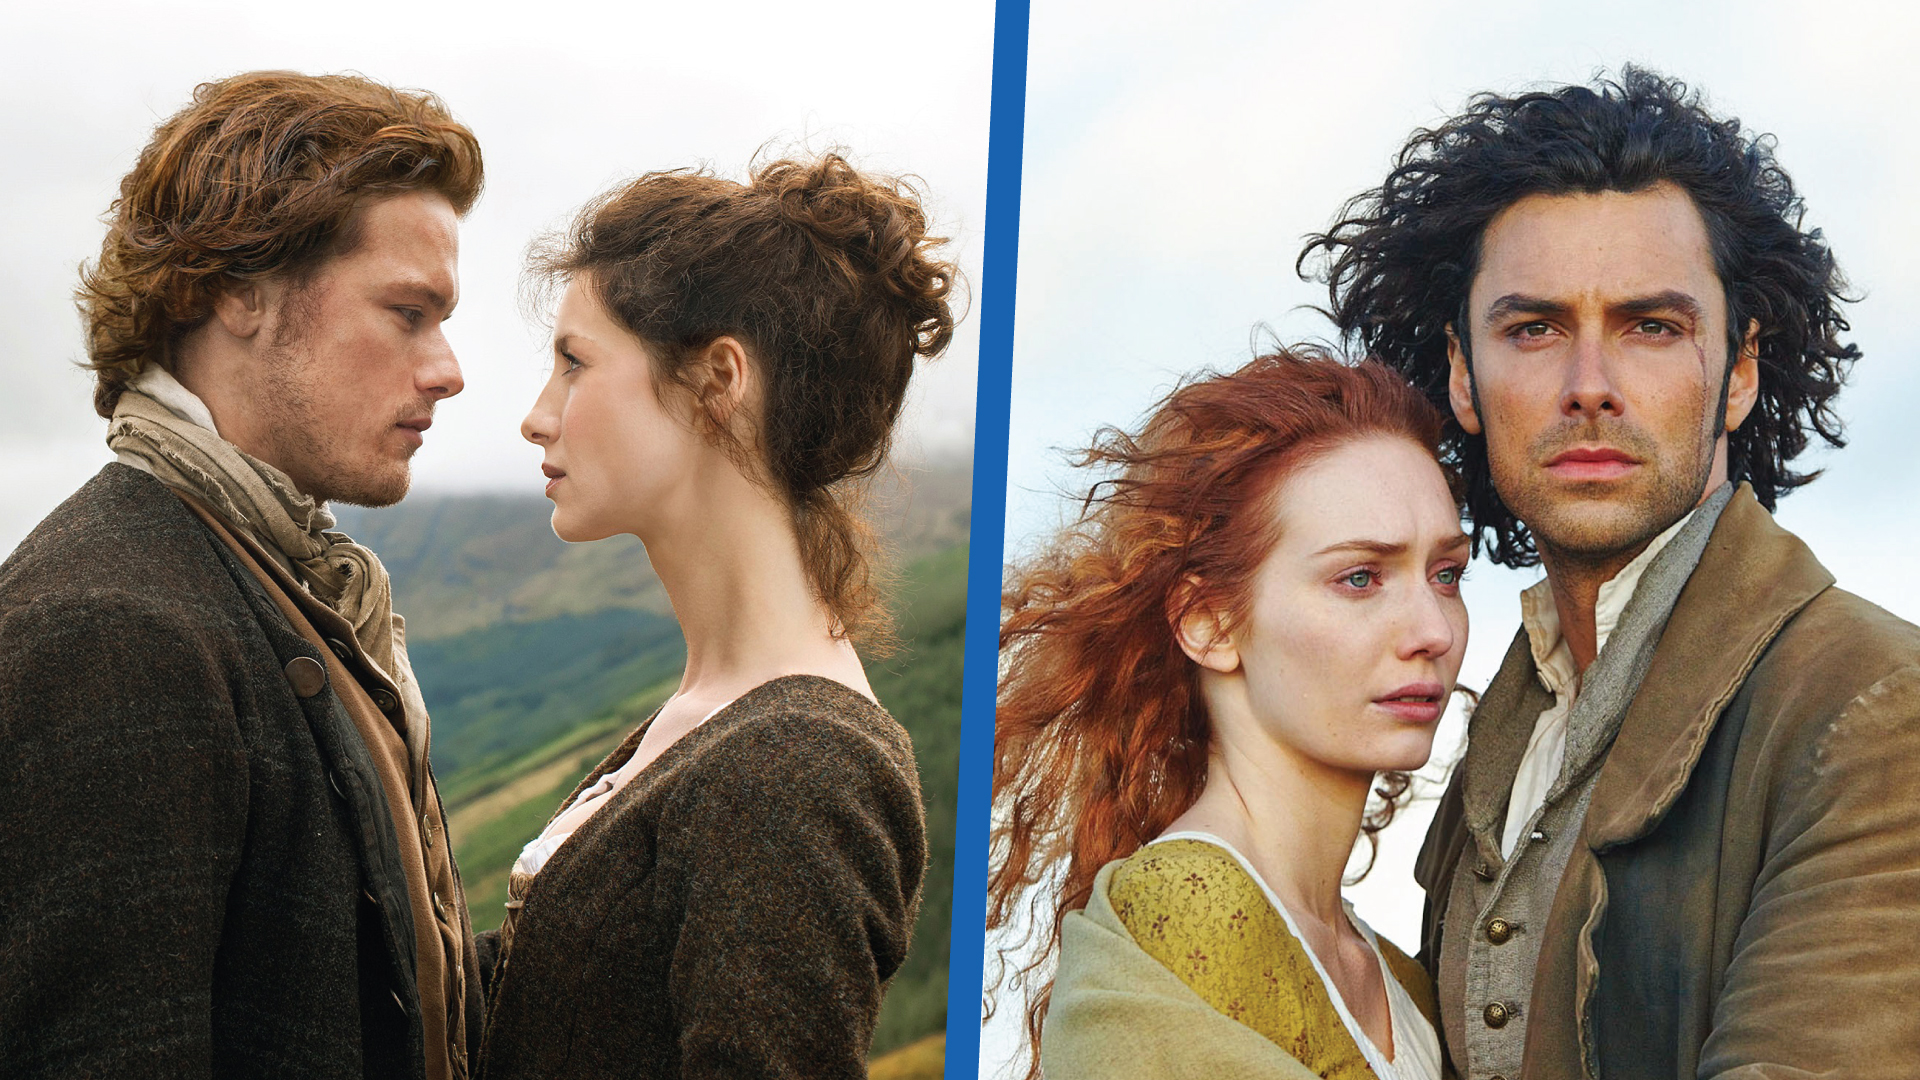 Period piece drama Outlander starring Sam Heughan and Caitriona Balfe as Jamie and Claire Fraser and Poldark on Masterpiece on PBS starring Aidan Turner and Eleanor Tomlinson as Ross Poldark and Demelza Carne